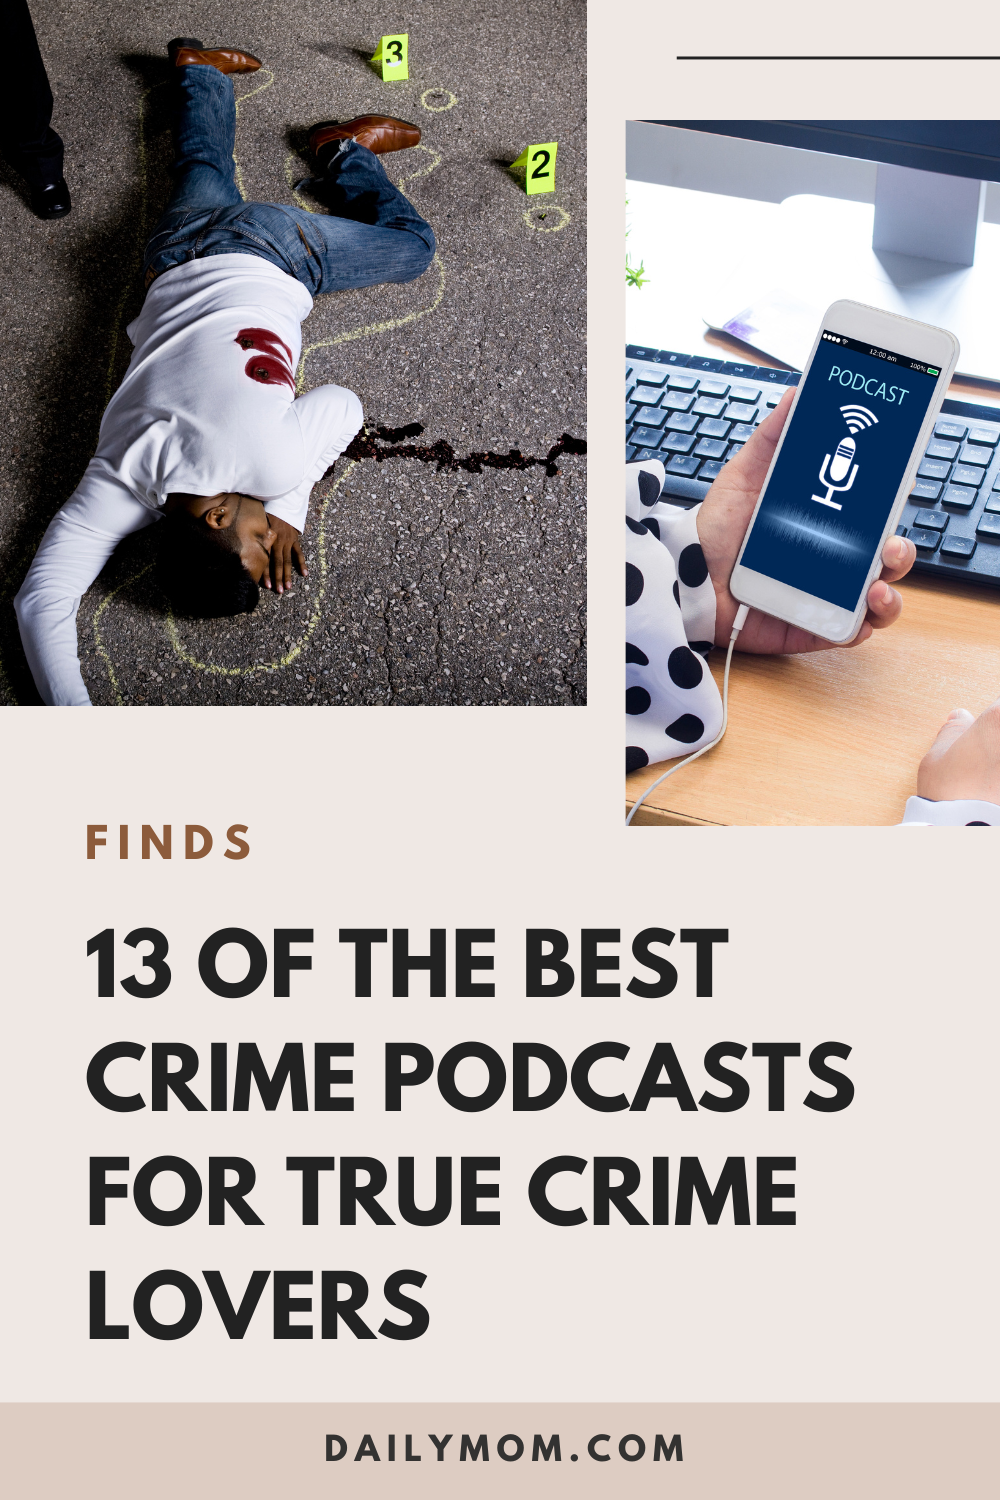 13 Of The Best Crime Podcasts For True Crime Lovers